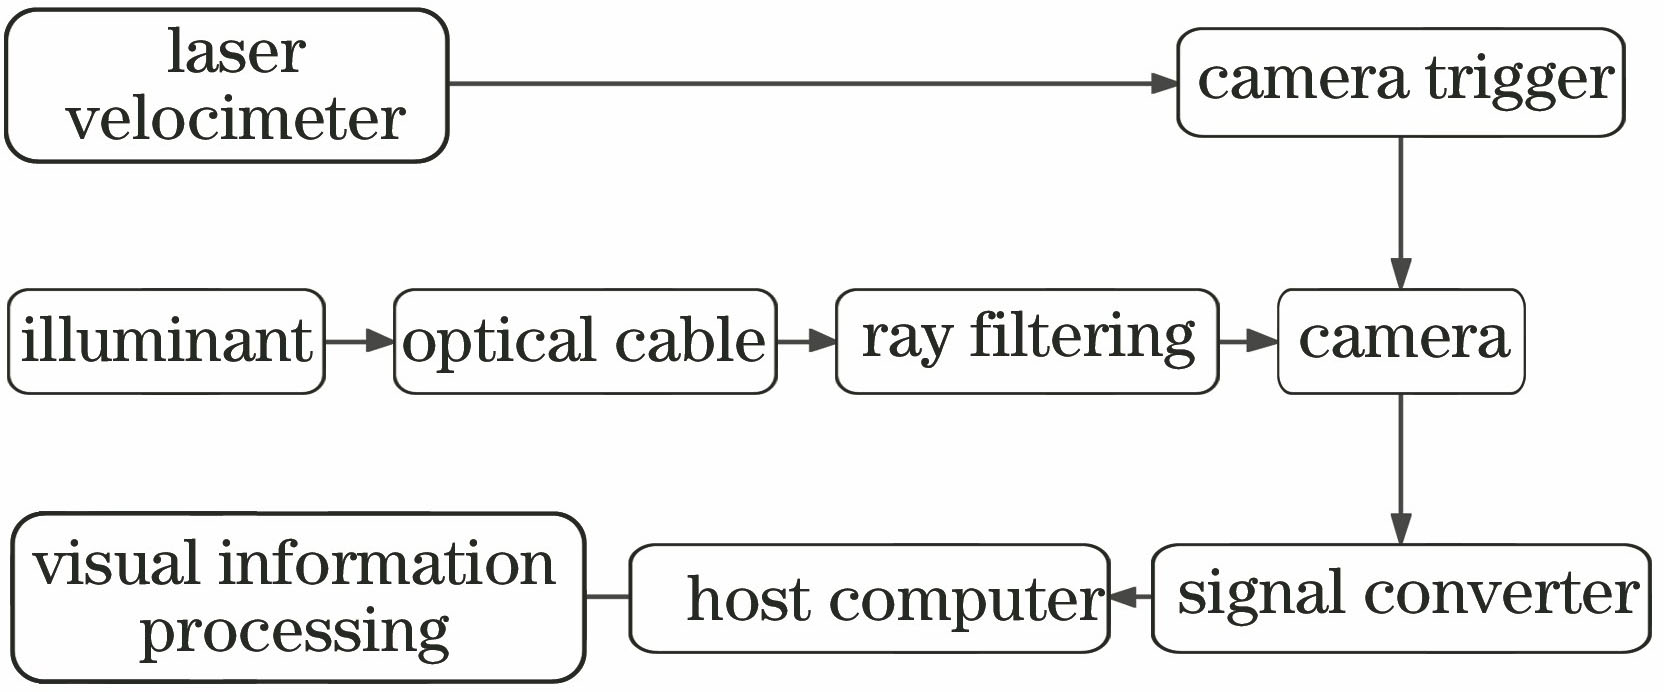 Diagram of system structure